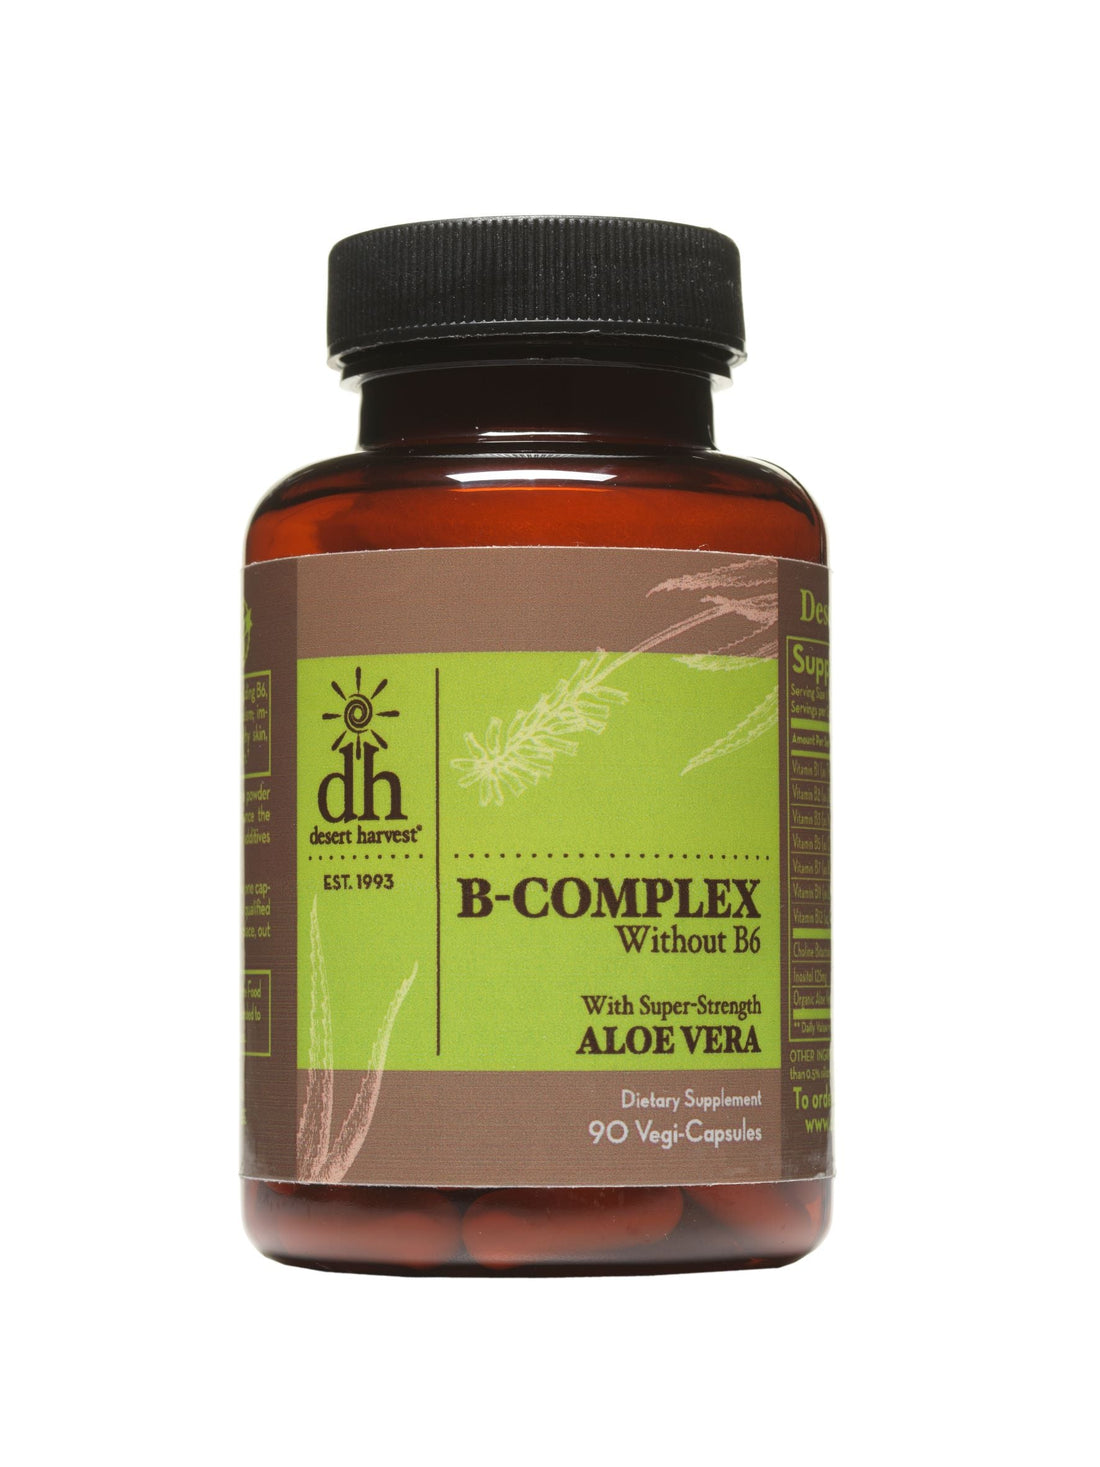 B-COMPLEX without B6 (90 Capsules) – Desert Harvest